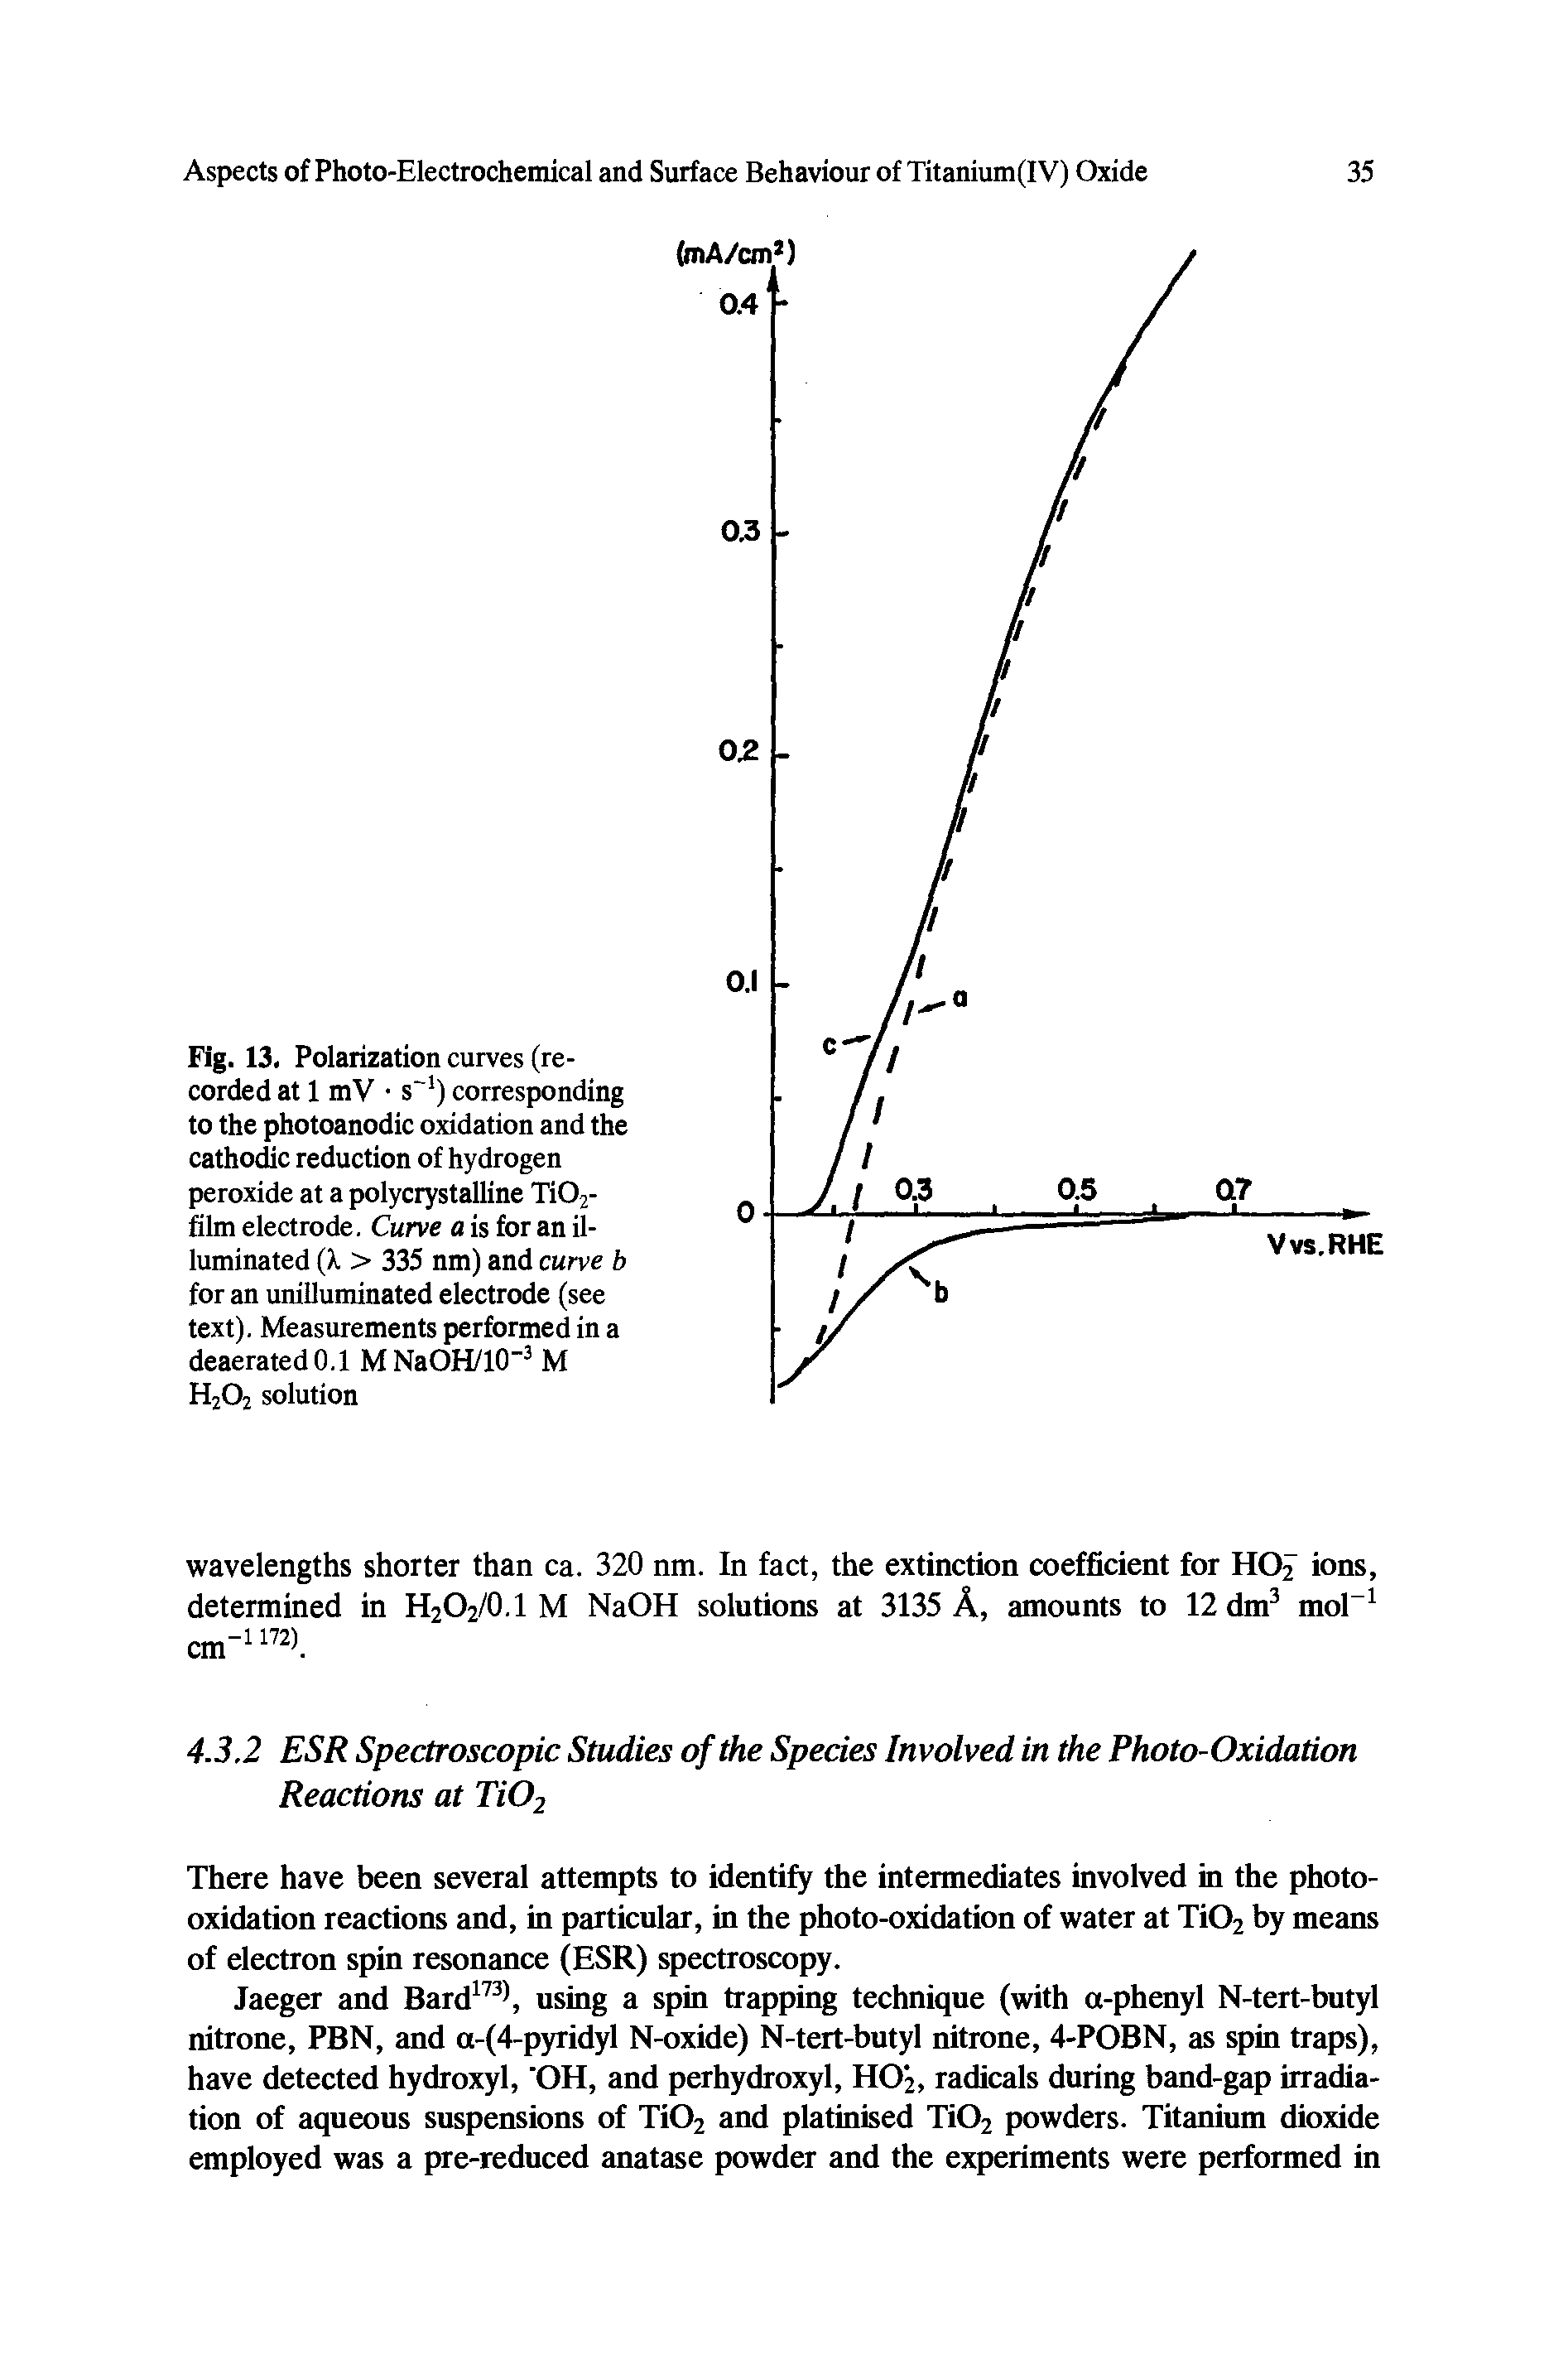 Fig. 13. Polarization curves (recorded at 1 mV s ) corresponding to the photoanodic oxidation and the cathodic reduction of hydrogen peroxide at a polycrystalline Ti02-film electrode. Curve a is for an illuminated (X > 335 nm) and curve b for an unilluminated electrode (see text). Measurements performed in a deaerated 0.1 MNaOH/10" M H2O2 solution...